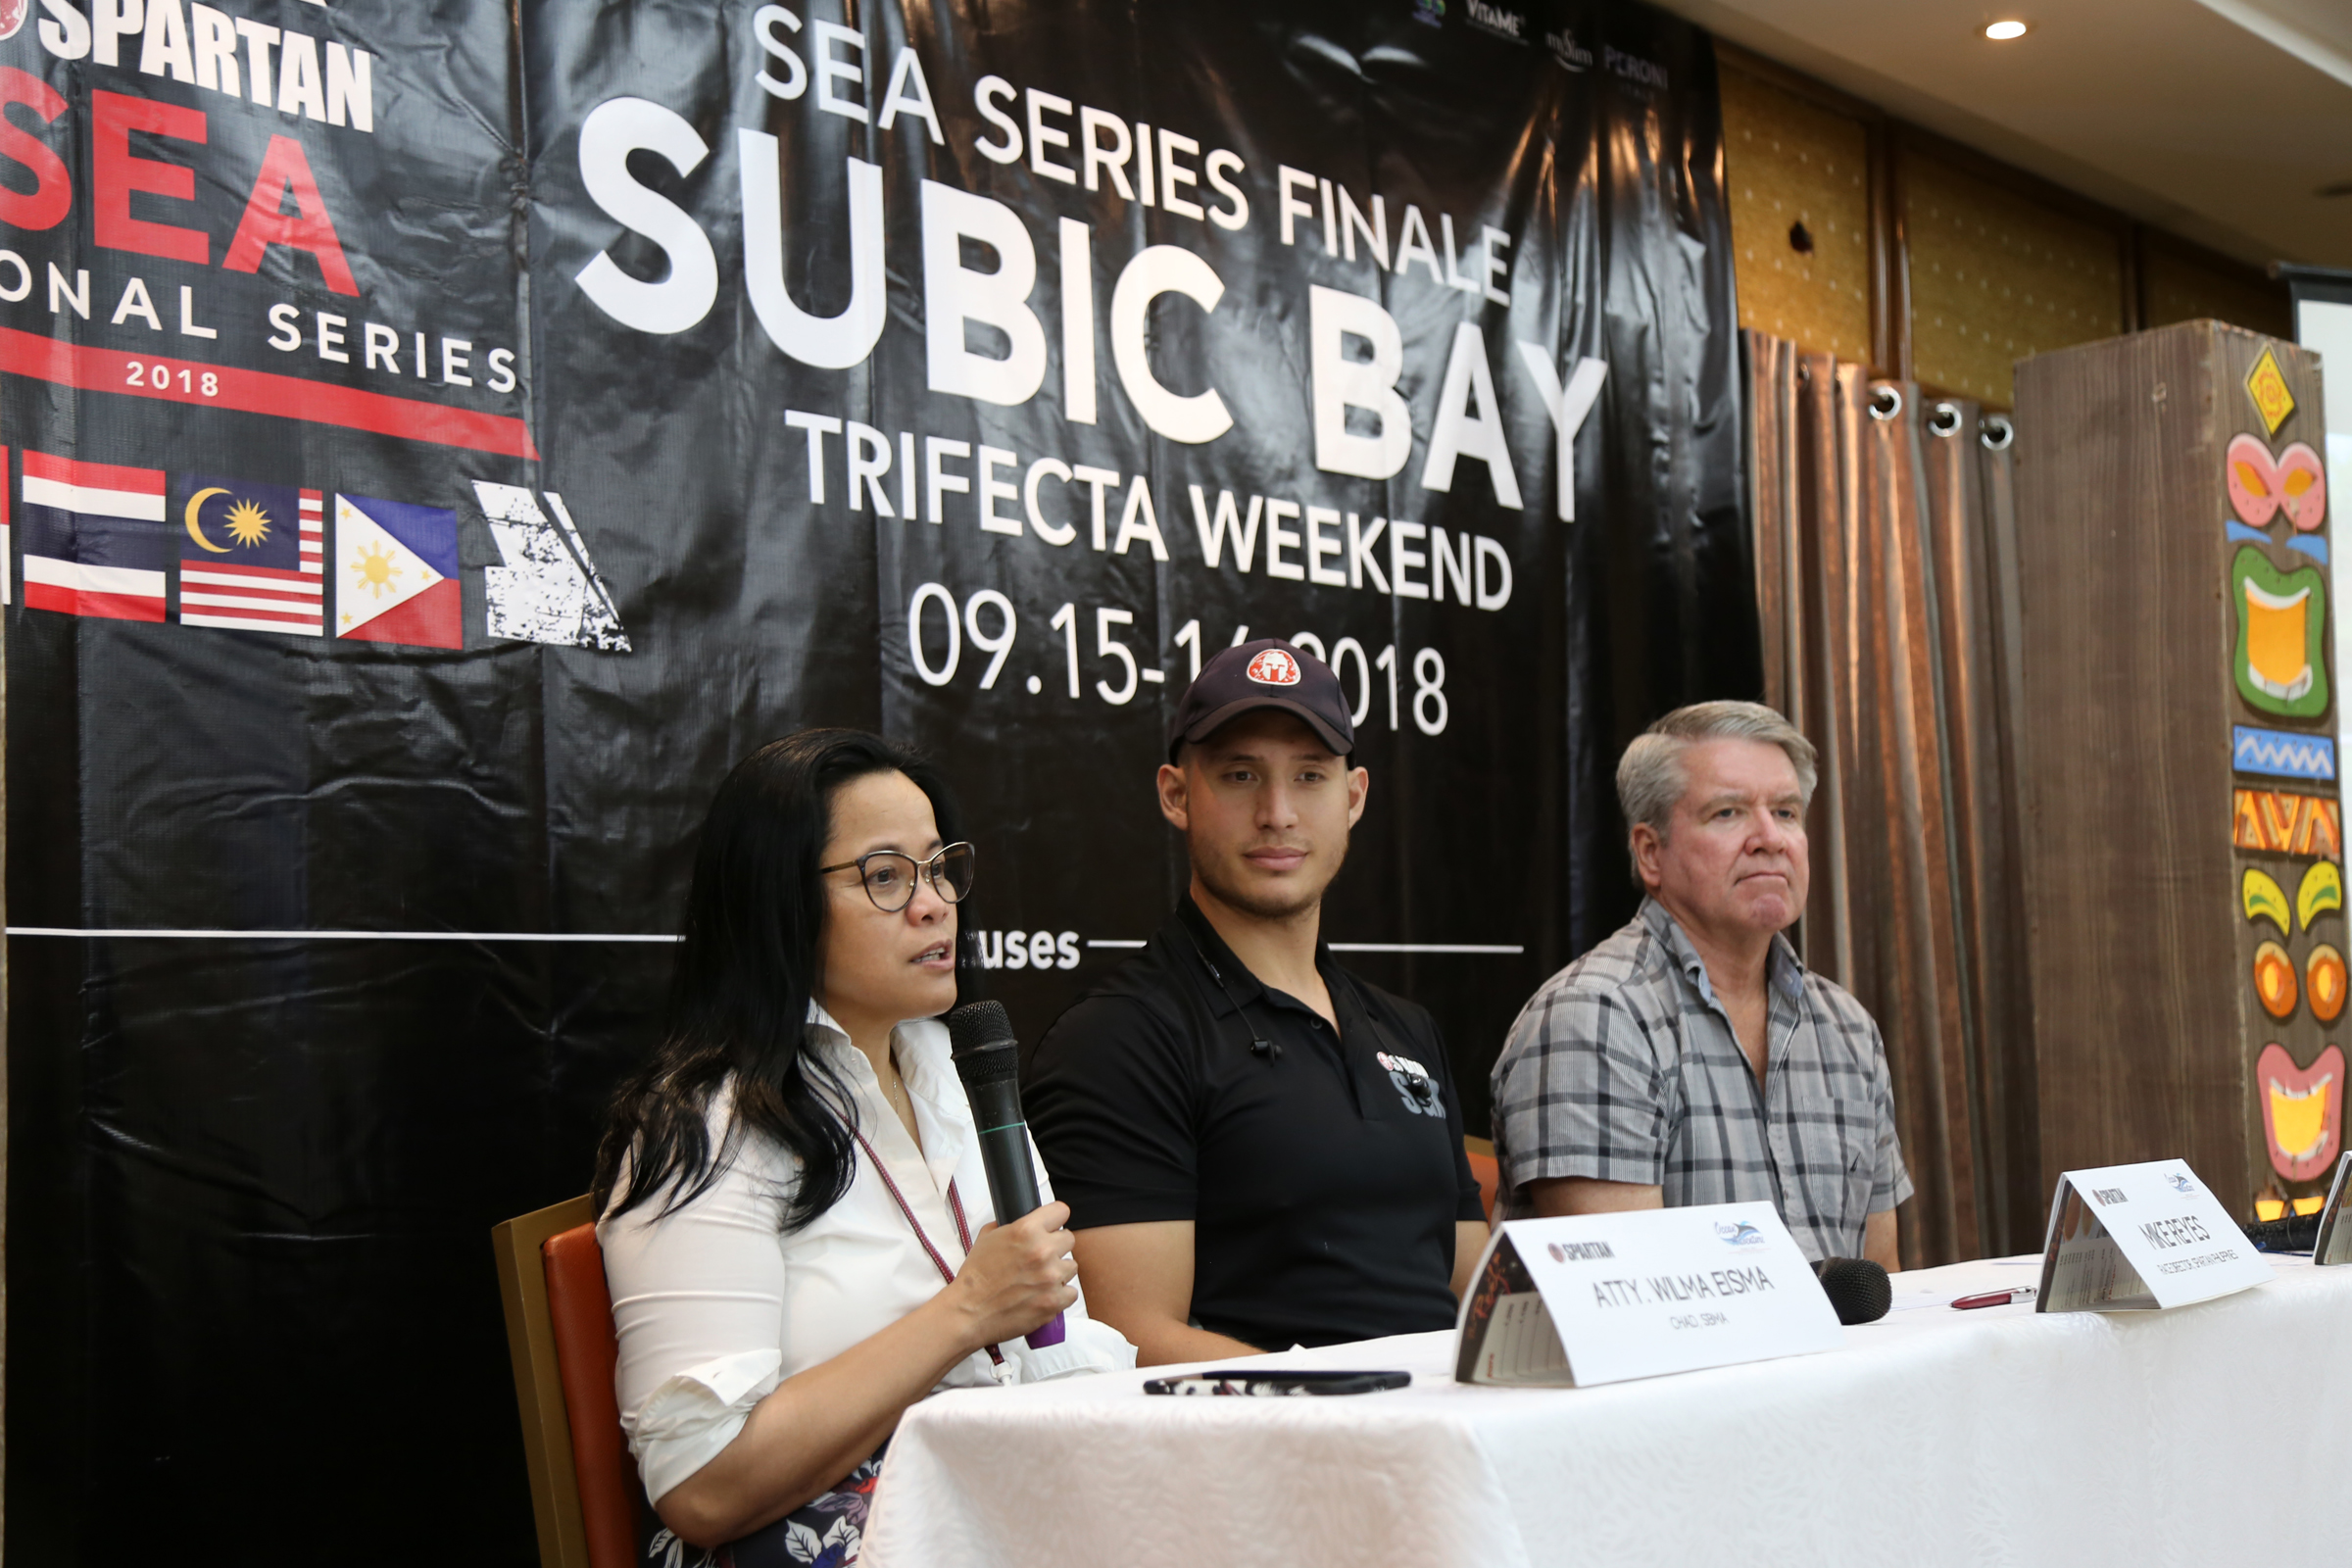 SBMA Chairman and Administrator Wilma T. Eisma welcomes the holding of the Spartan Trifecta Race in the Subic Bay Freeport following the announcement of the event by Race Director Michael Reyes (middle) and SBMEI founder Scott Sharpe.